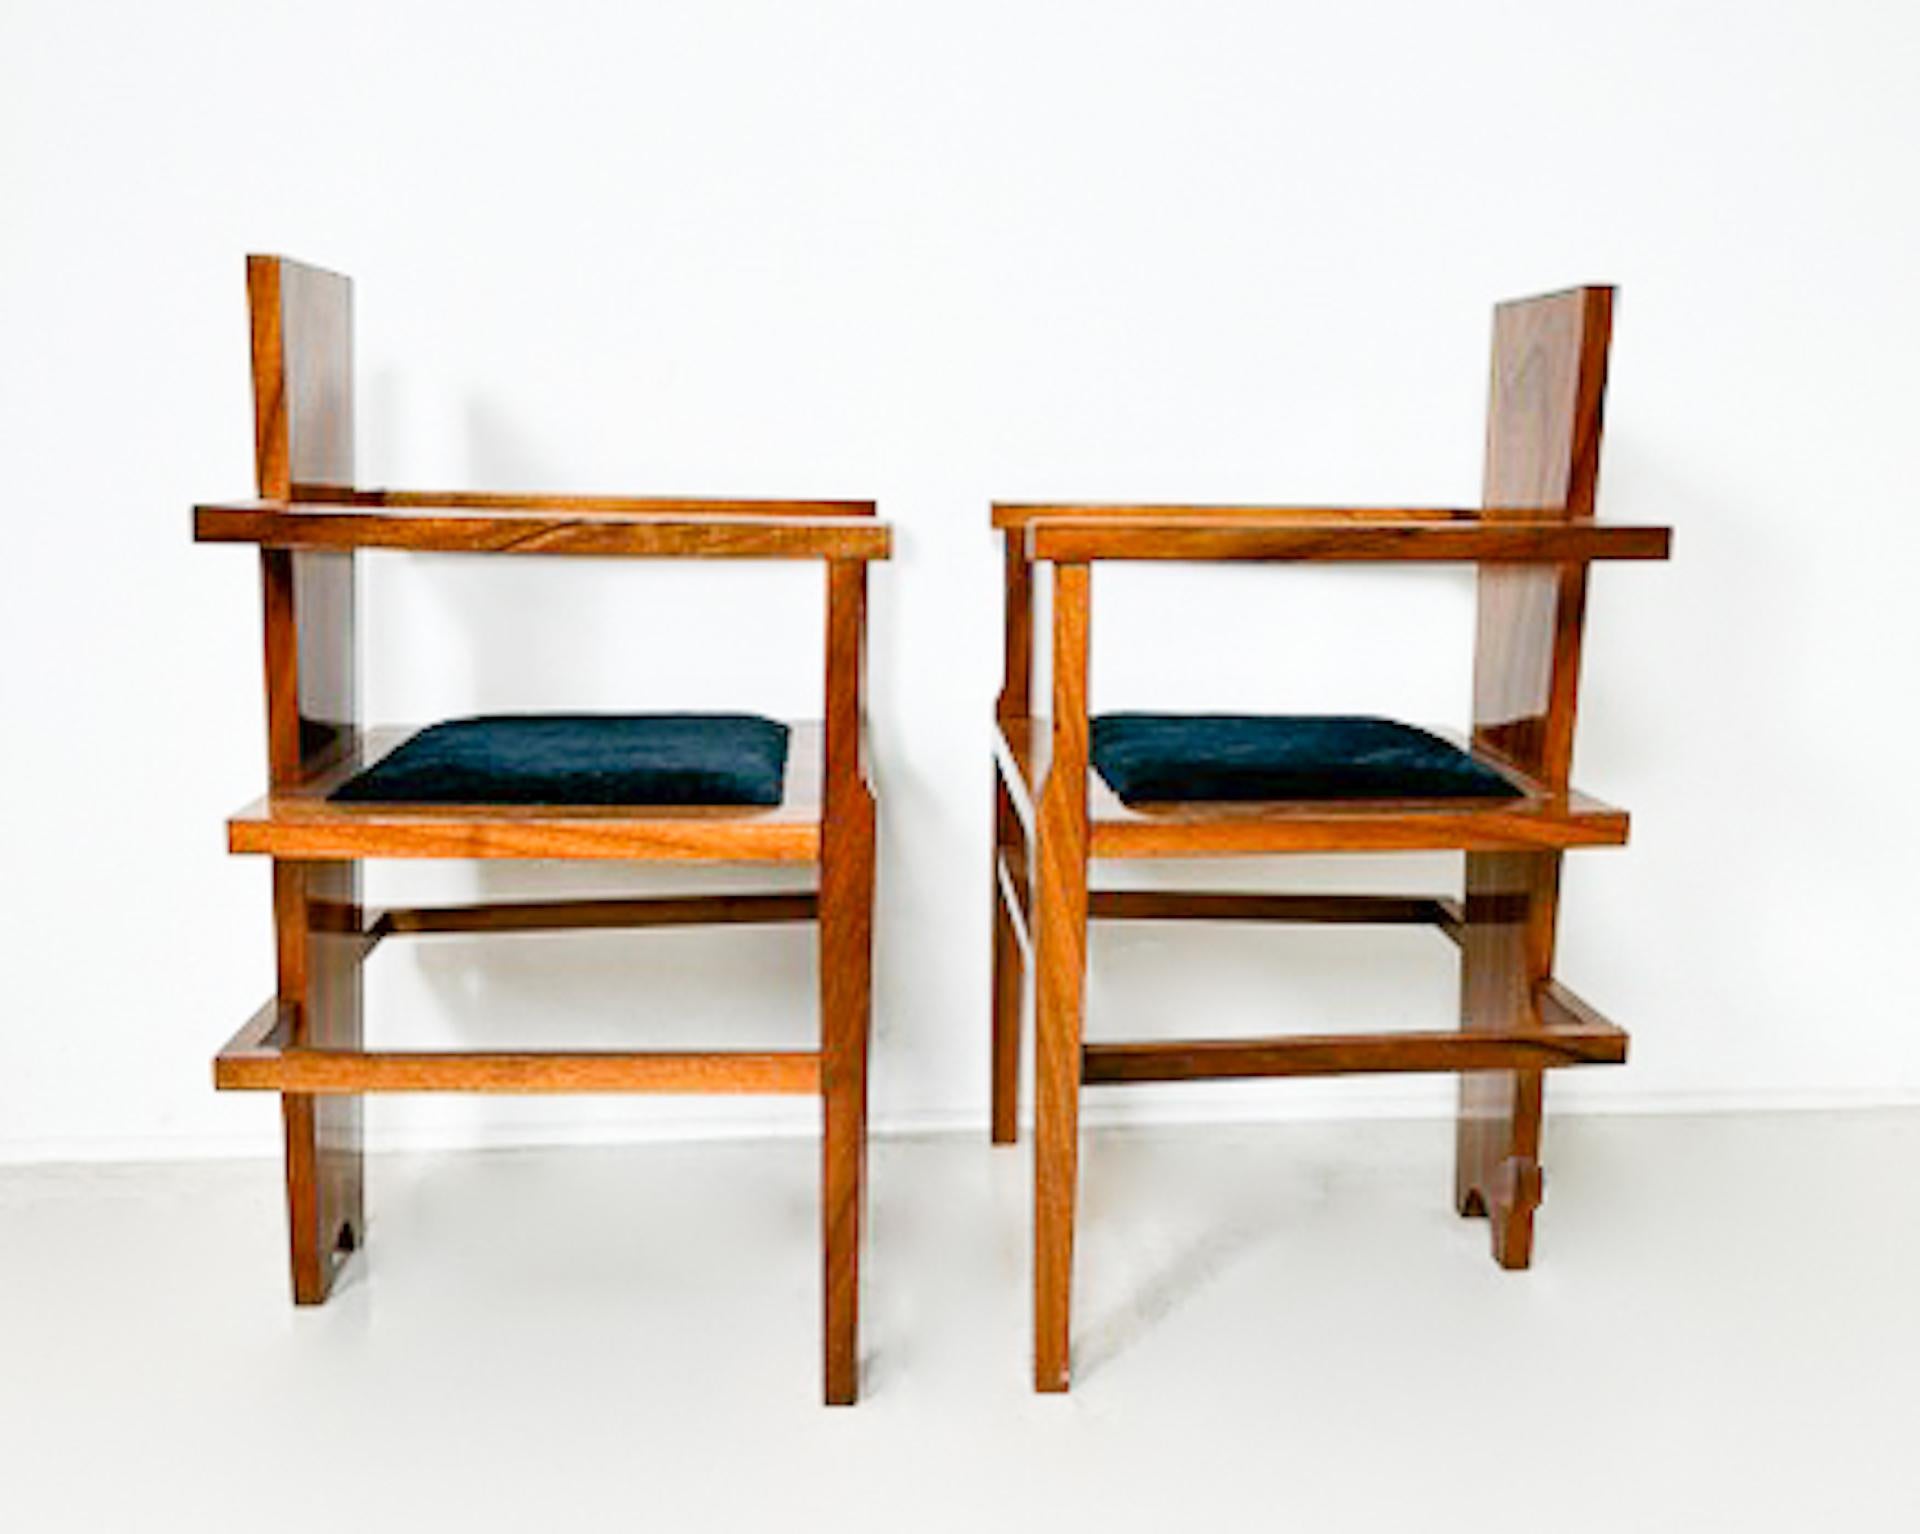 Pair of Constructivist Walnut Armchairs, 1940s For Sale 3